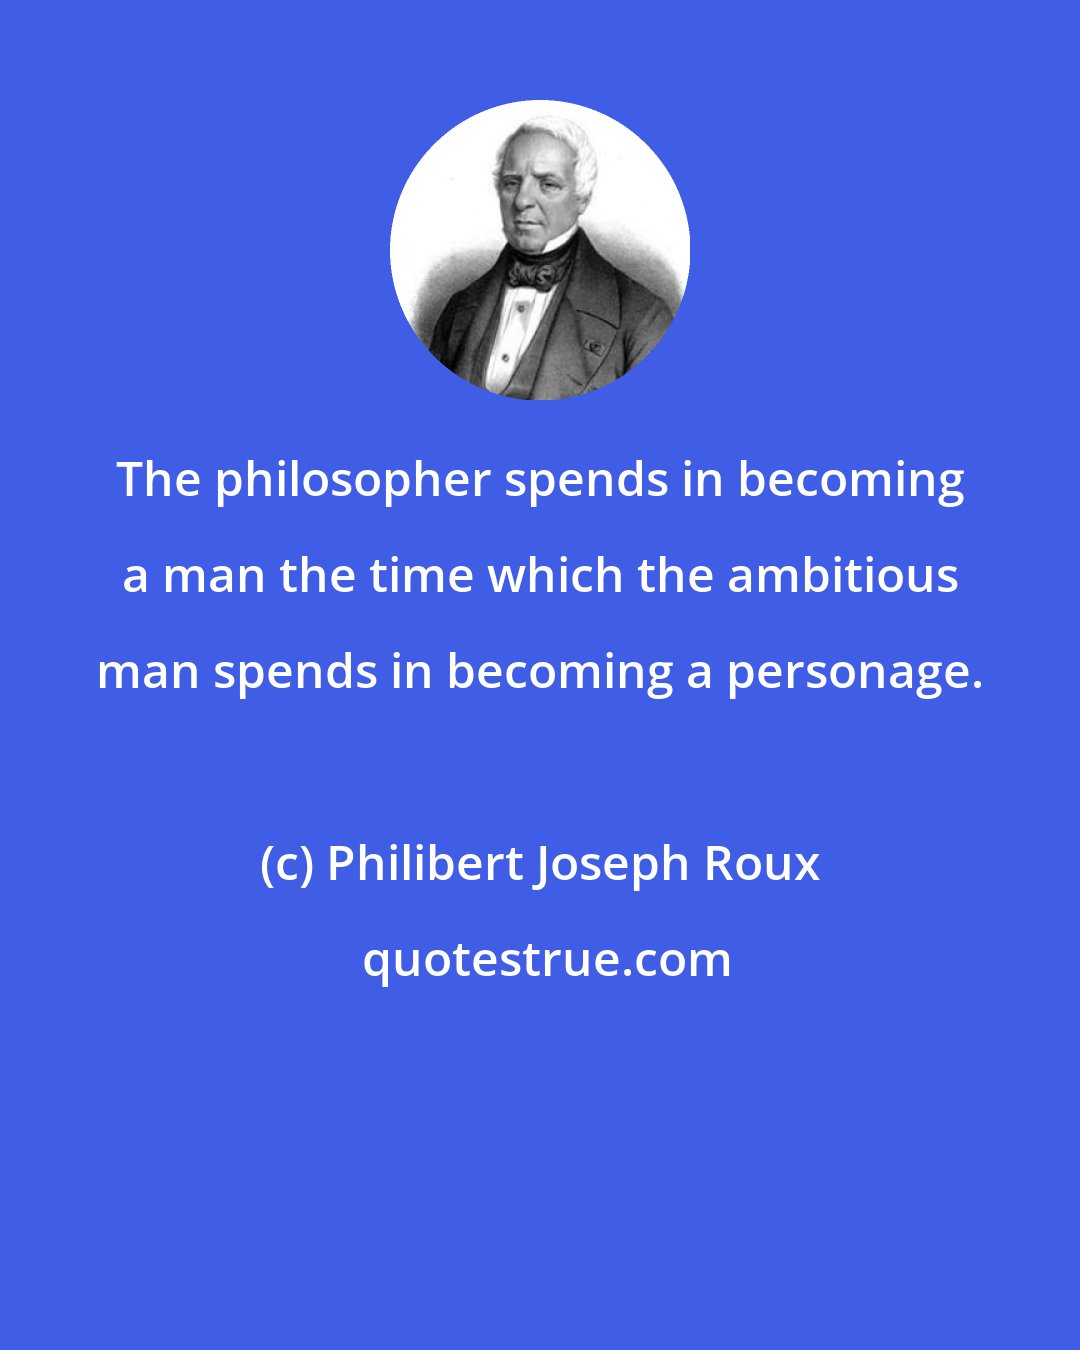 Philibert Joseph Roux: The philosopher spends in becoming a man the time which the ambitious man spends in becoming a personage.